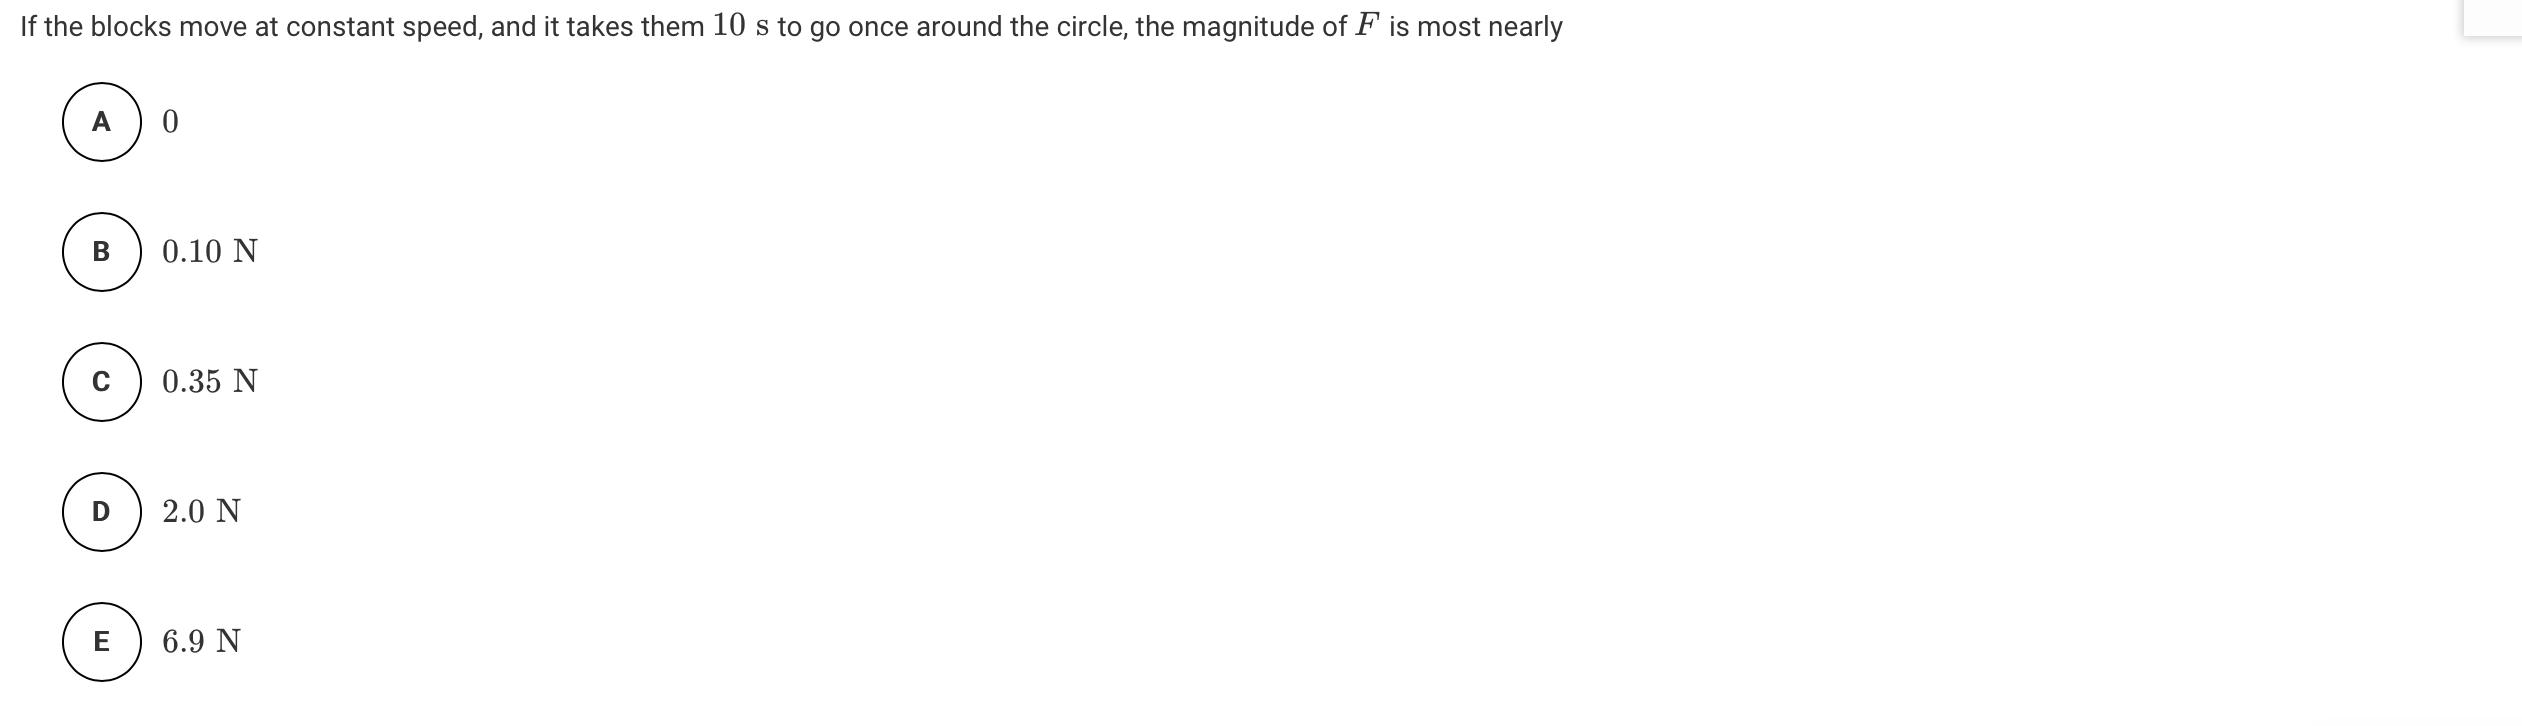 If the blocks move at constant speed, and it takes them 10 s to go once around the circle, the magnitude of F is most nearly